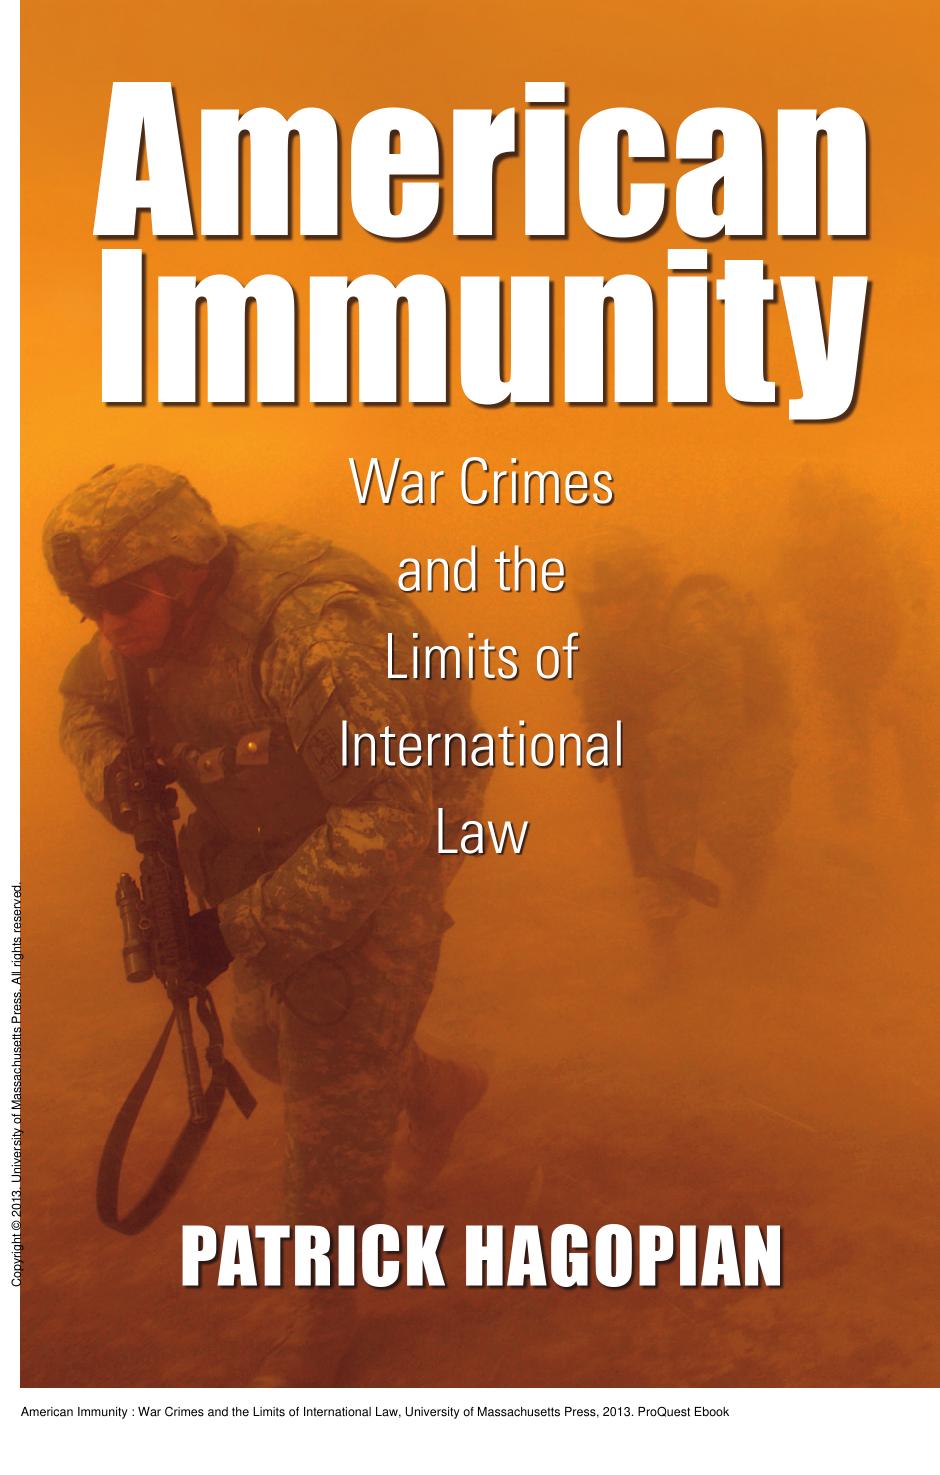 American Immunity: War Crimes and the Limits of International Law by Patrick Hagopian